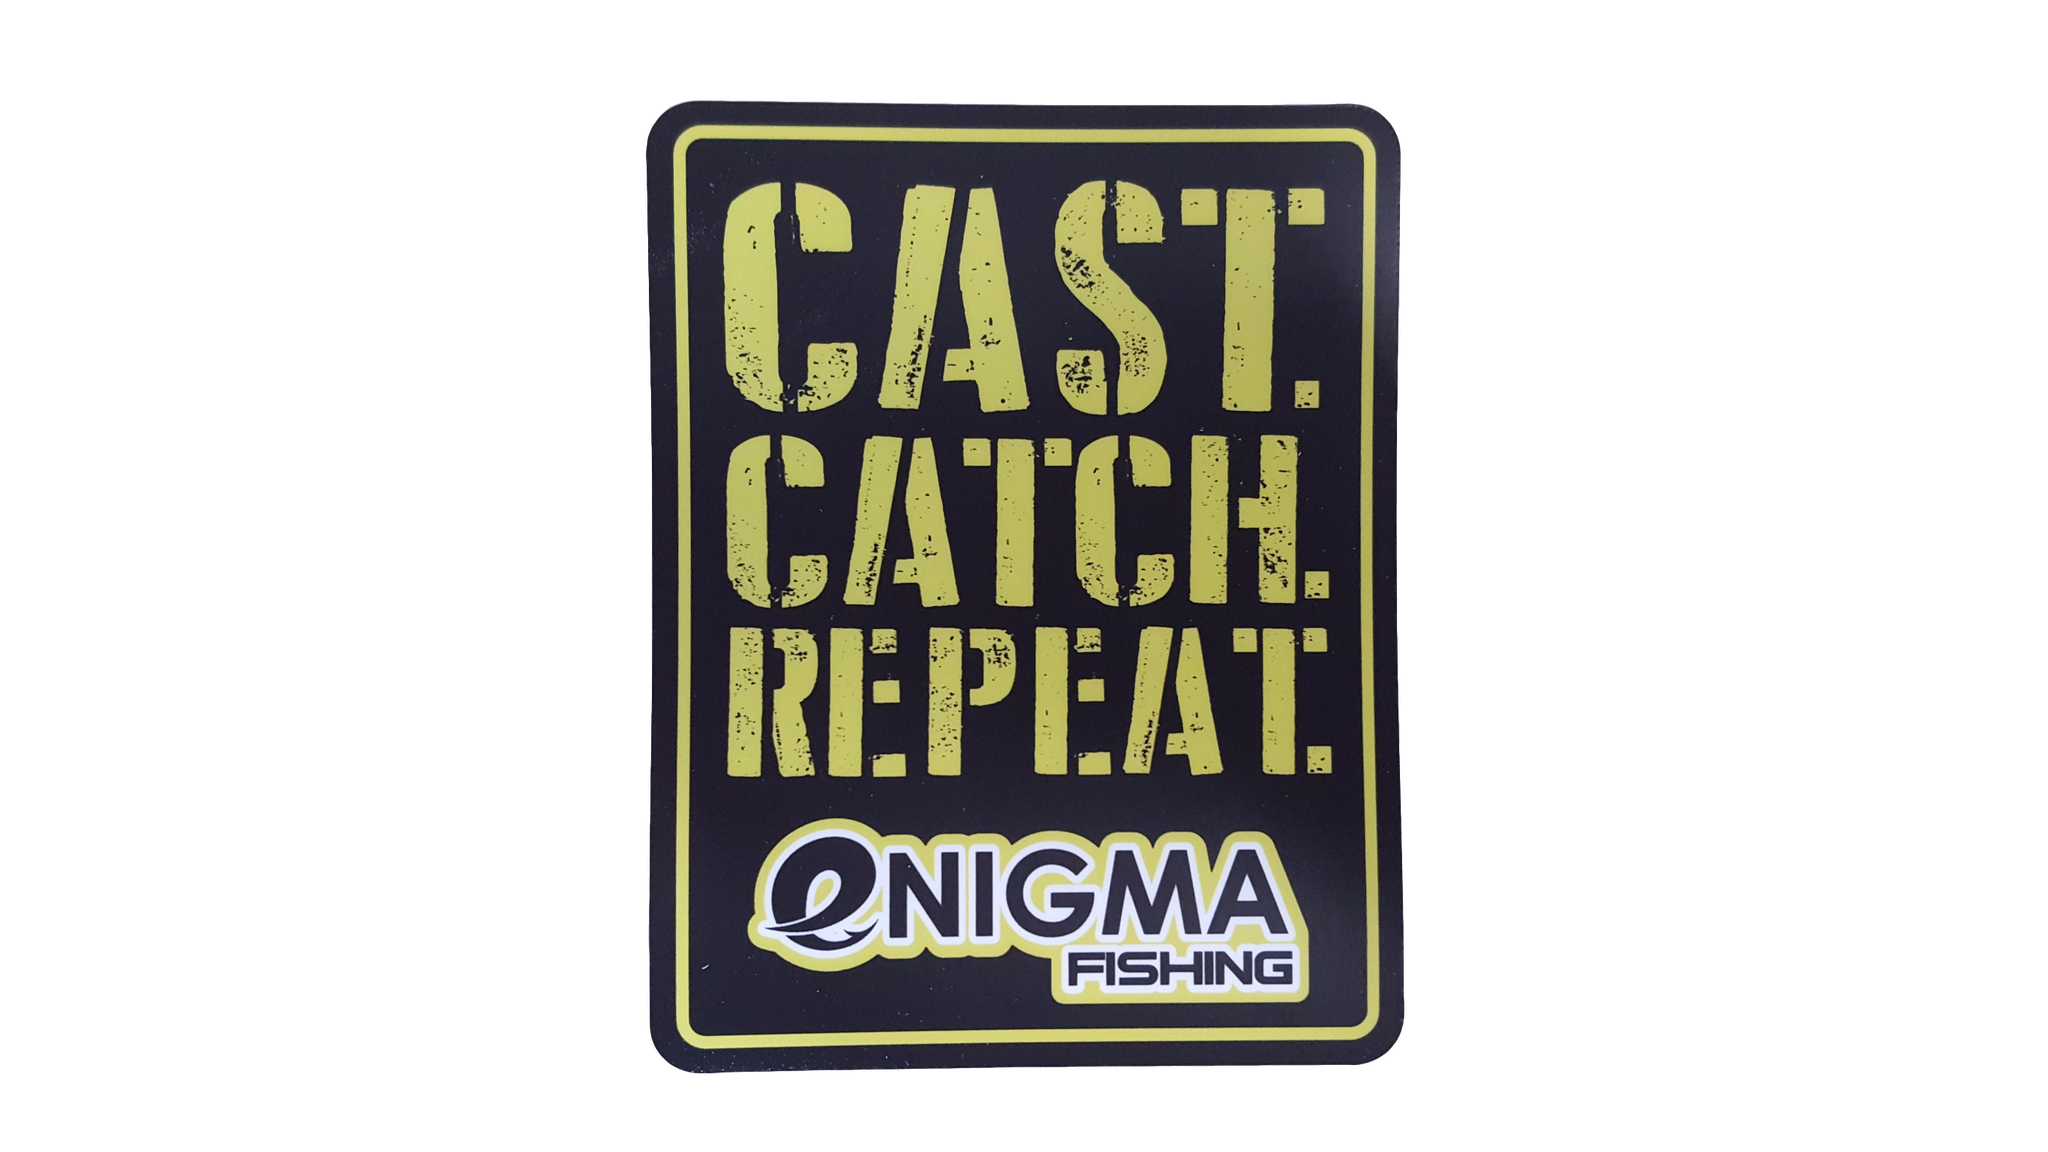 Enigma Cast.Catch.Repeat. Decal